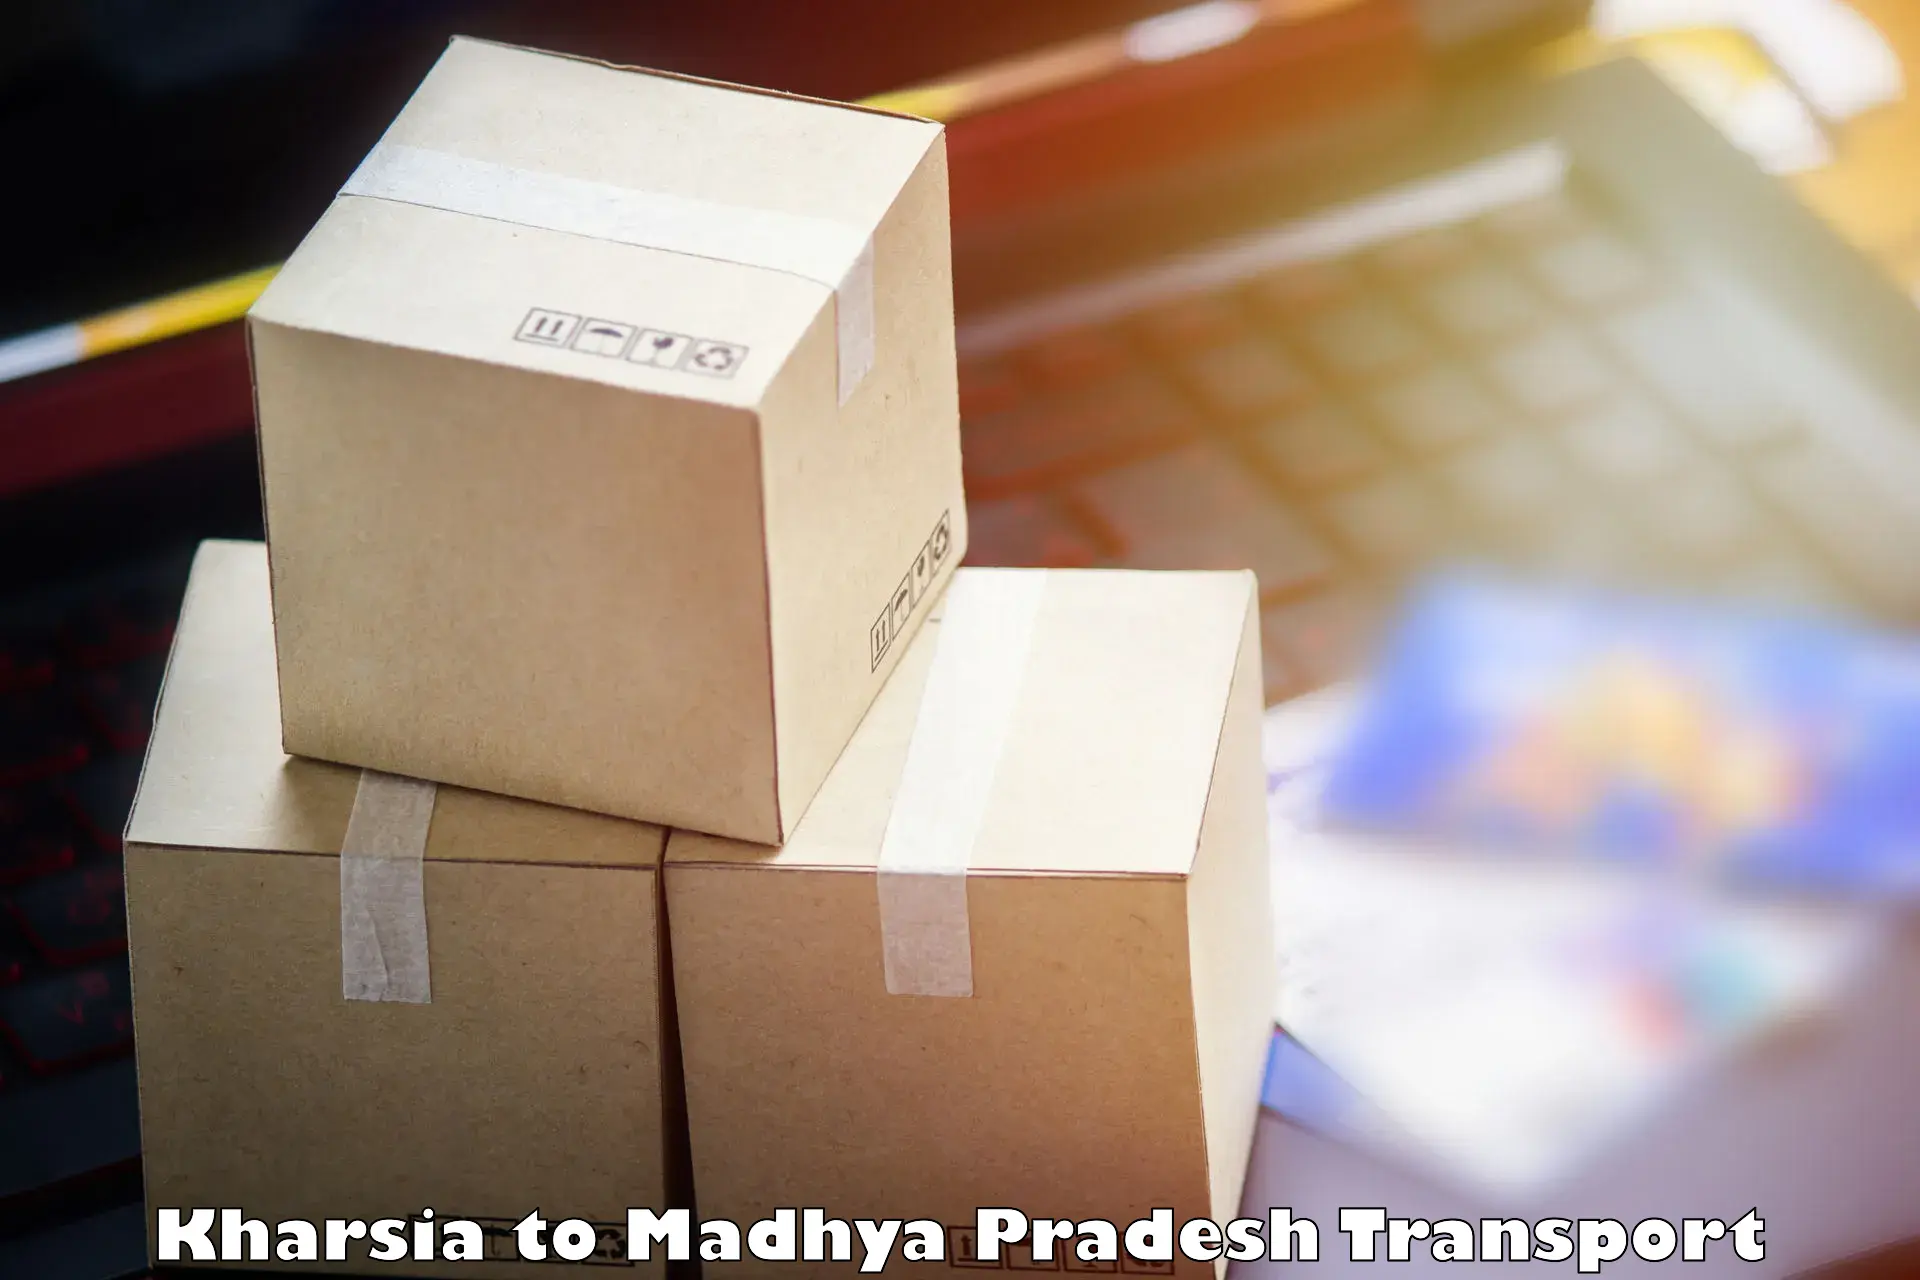 Truck transport companies in India Kharsia to Sehore